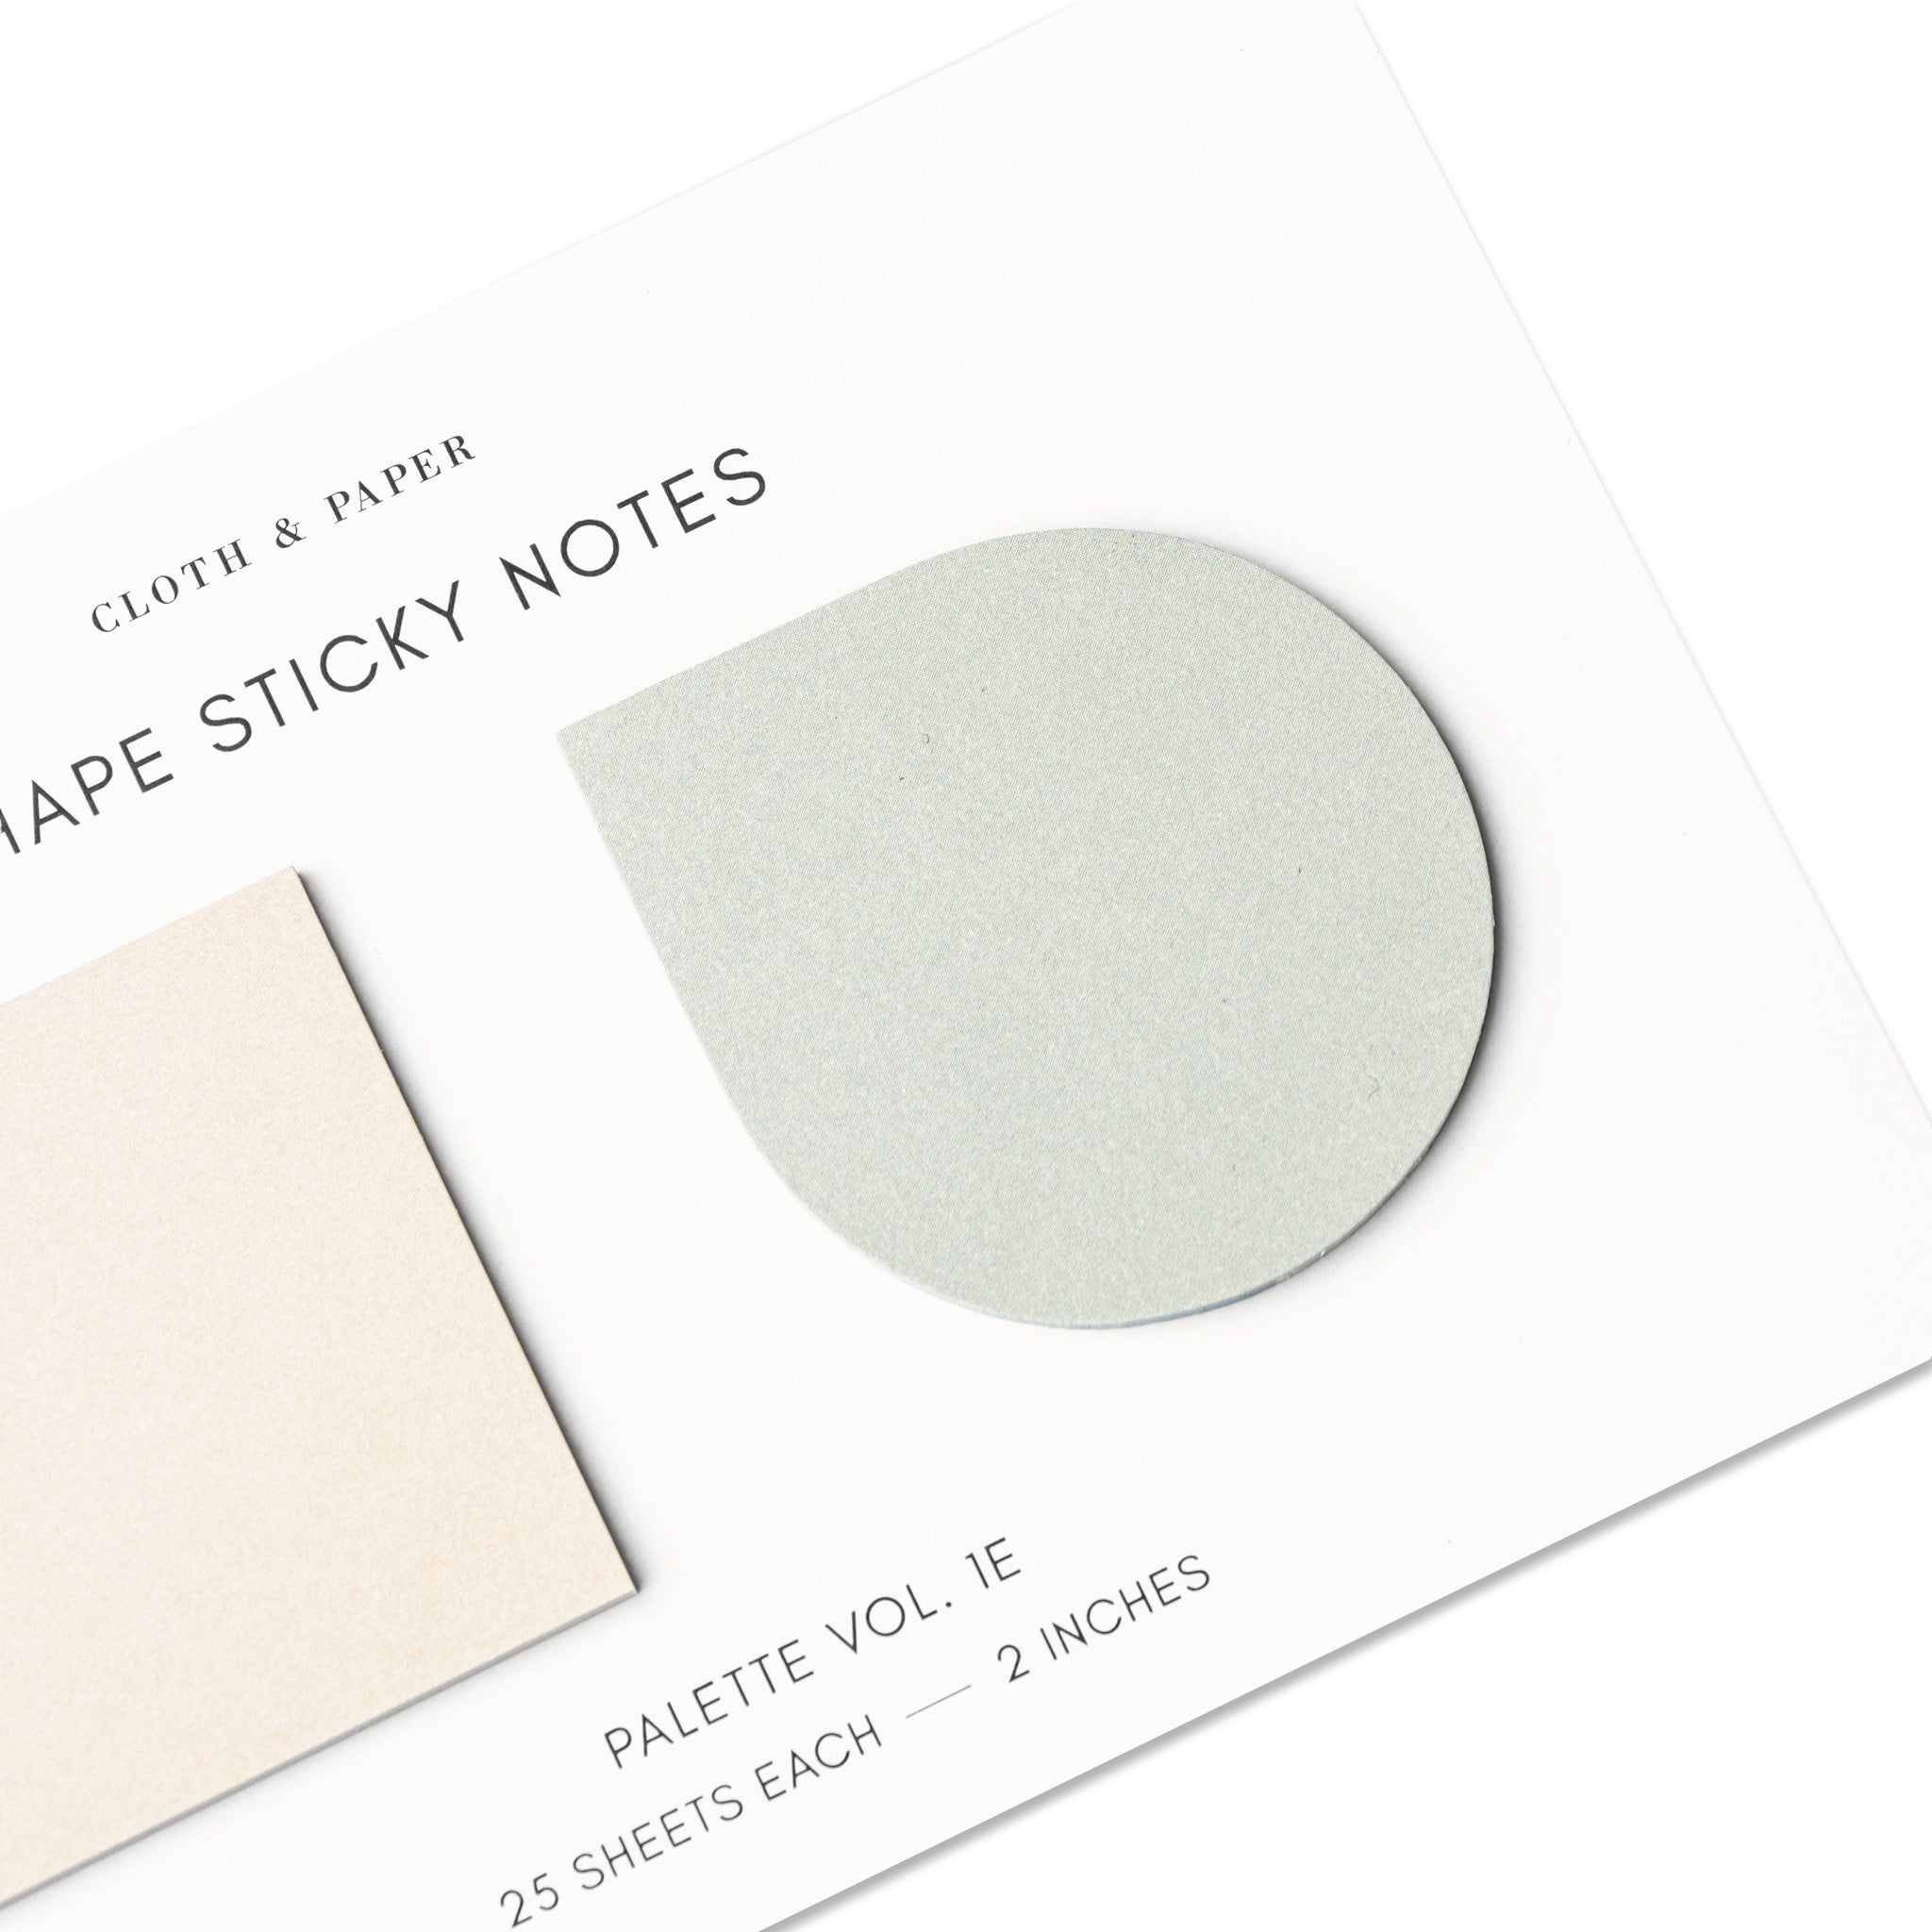 Petit bloc-notes autocollant - Funny small sticky notes